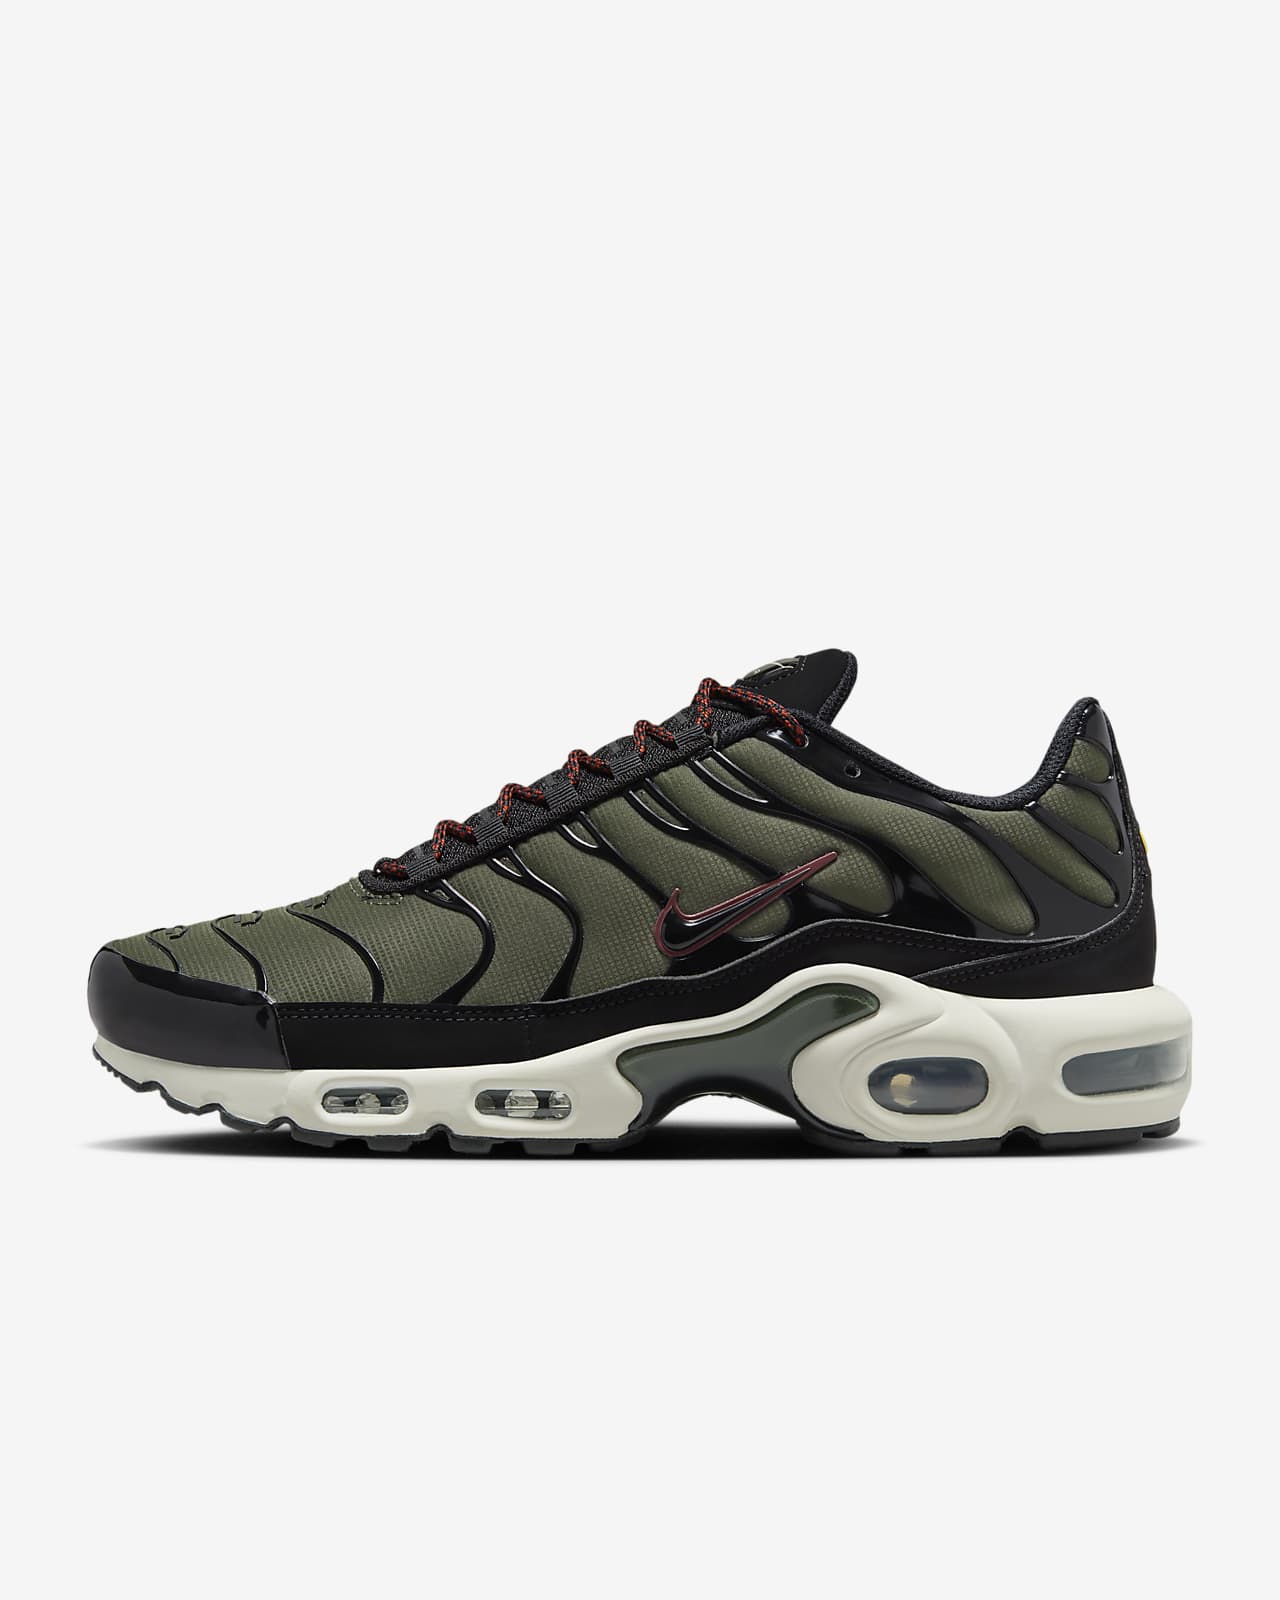 Nike Air Max Plus III On Foot  These are the ultimate road